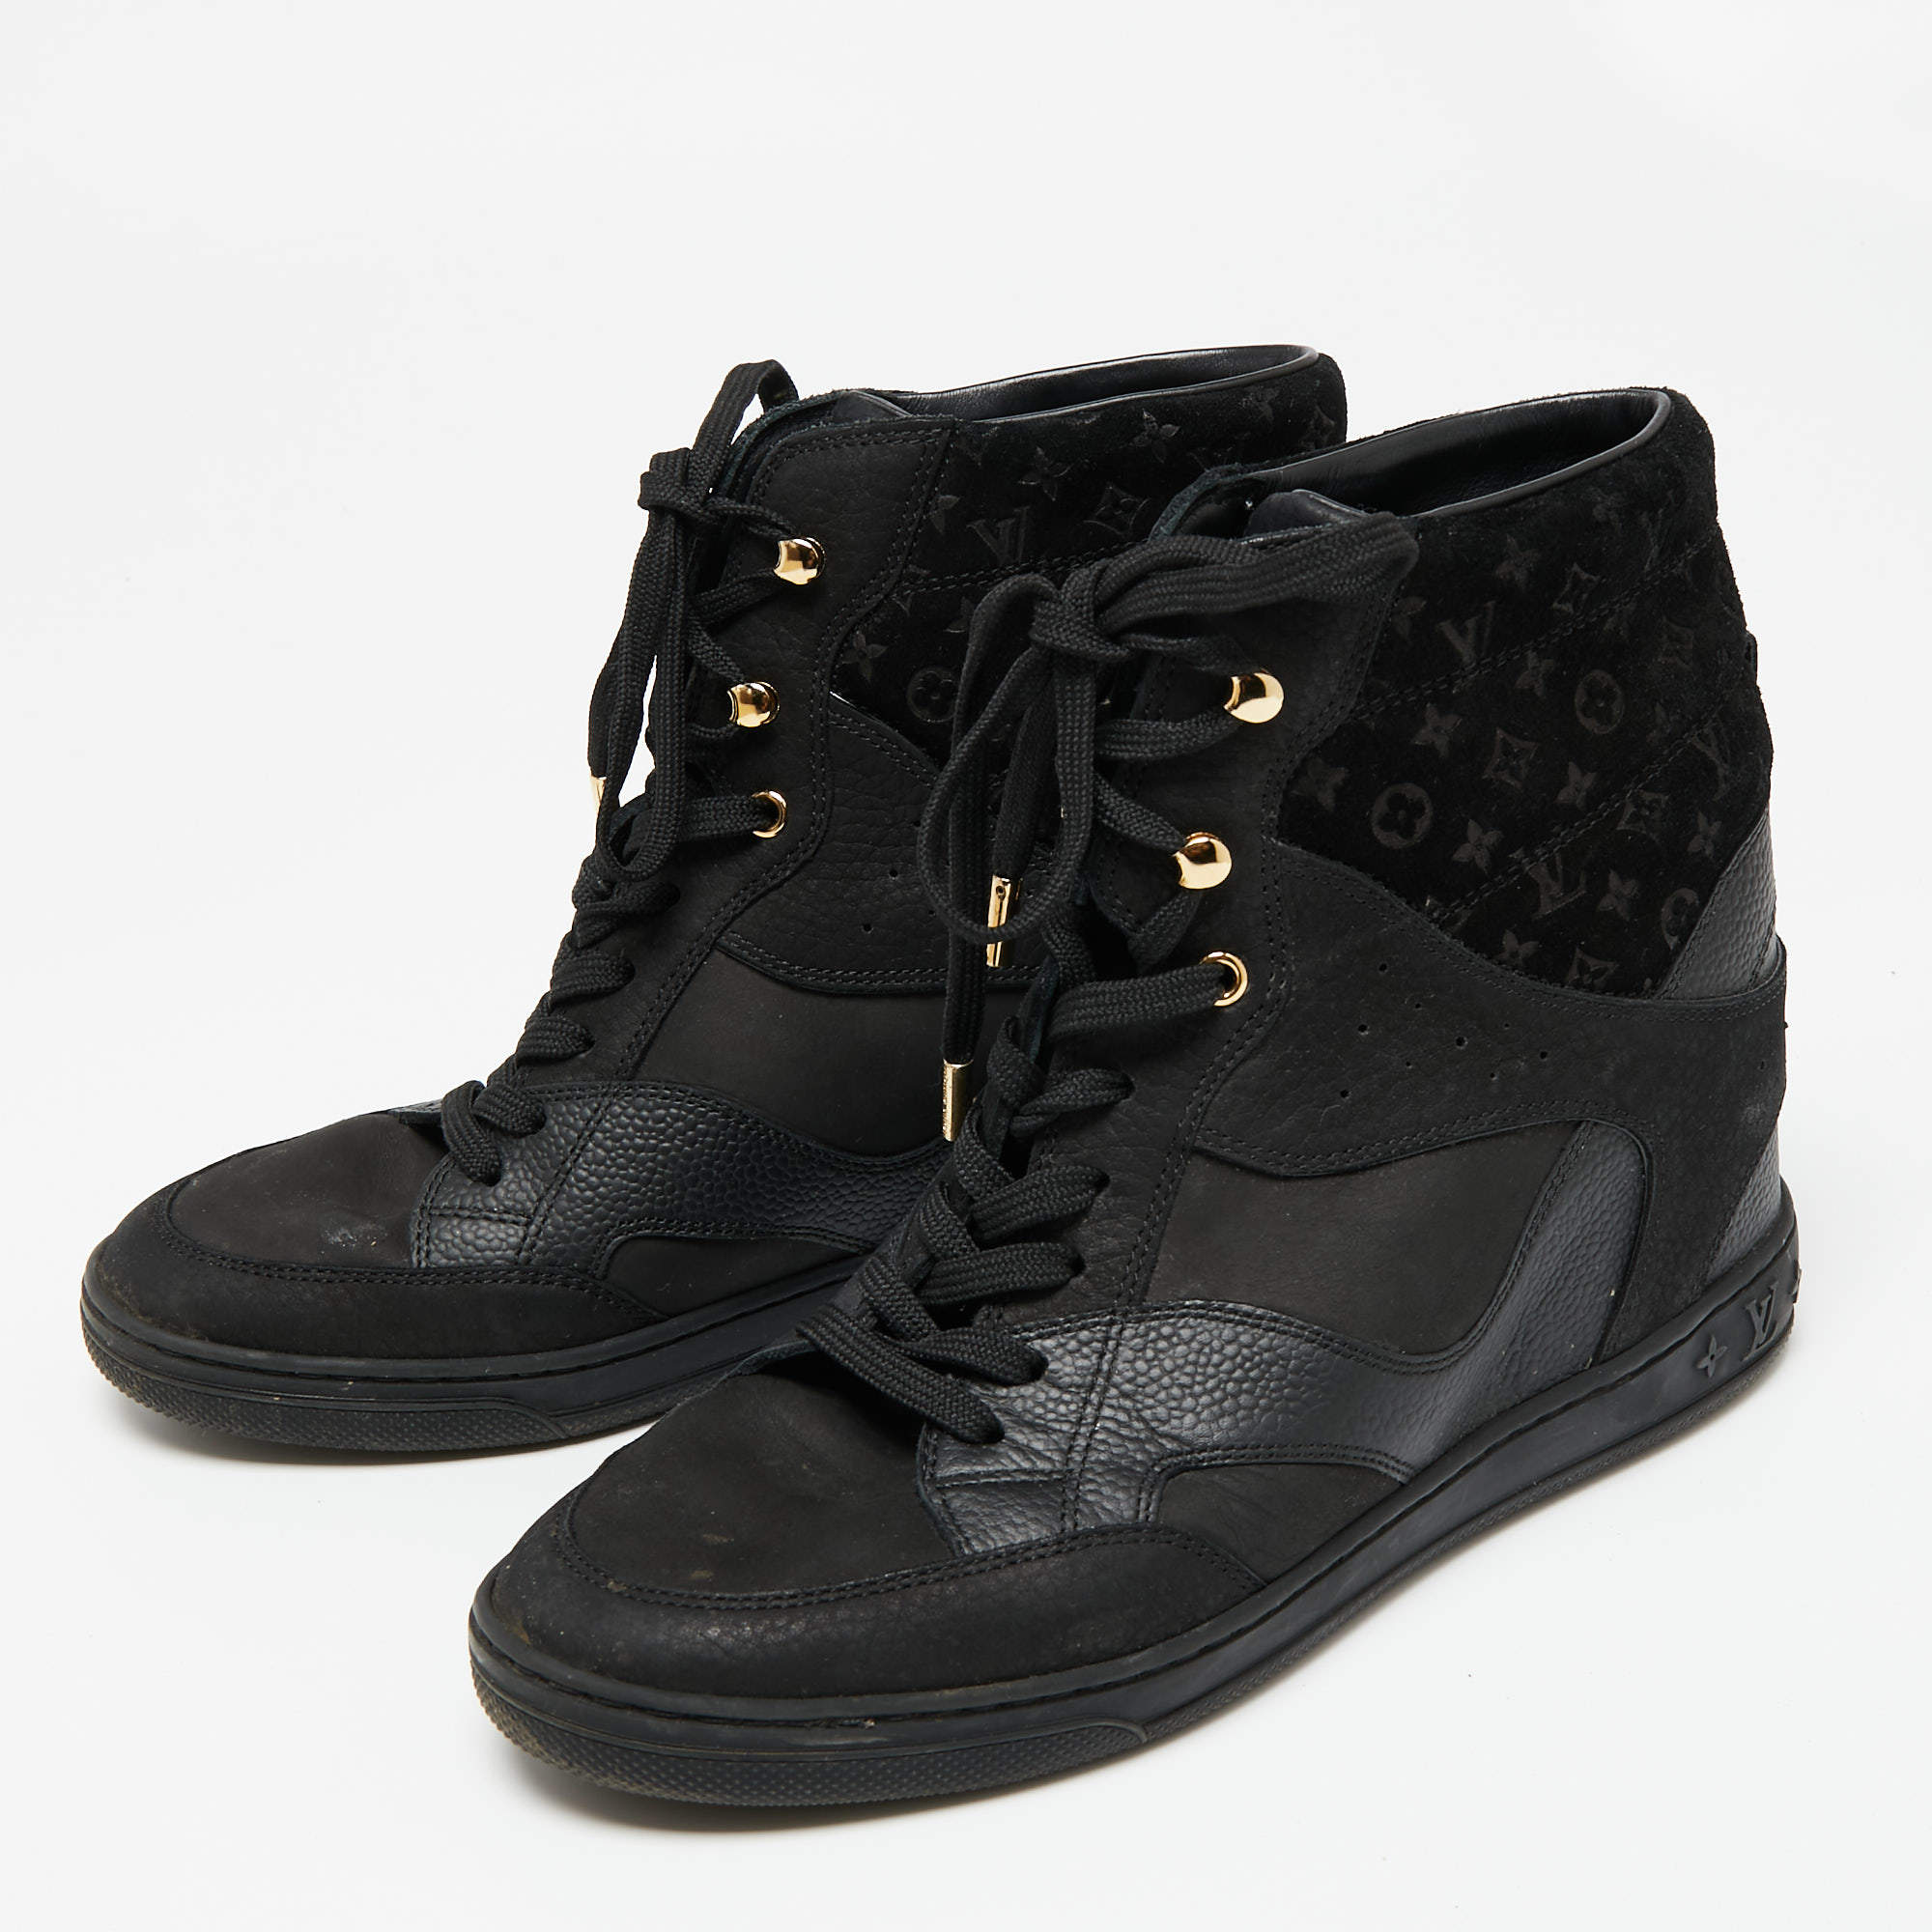 Louis Vuitton Black Leather and Embossed Monogram Suede Millenium Wedge  High-Top Sneakers Size 38.5 Louis Vuitton